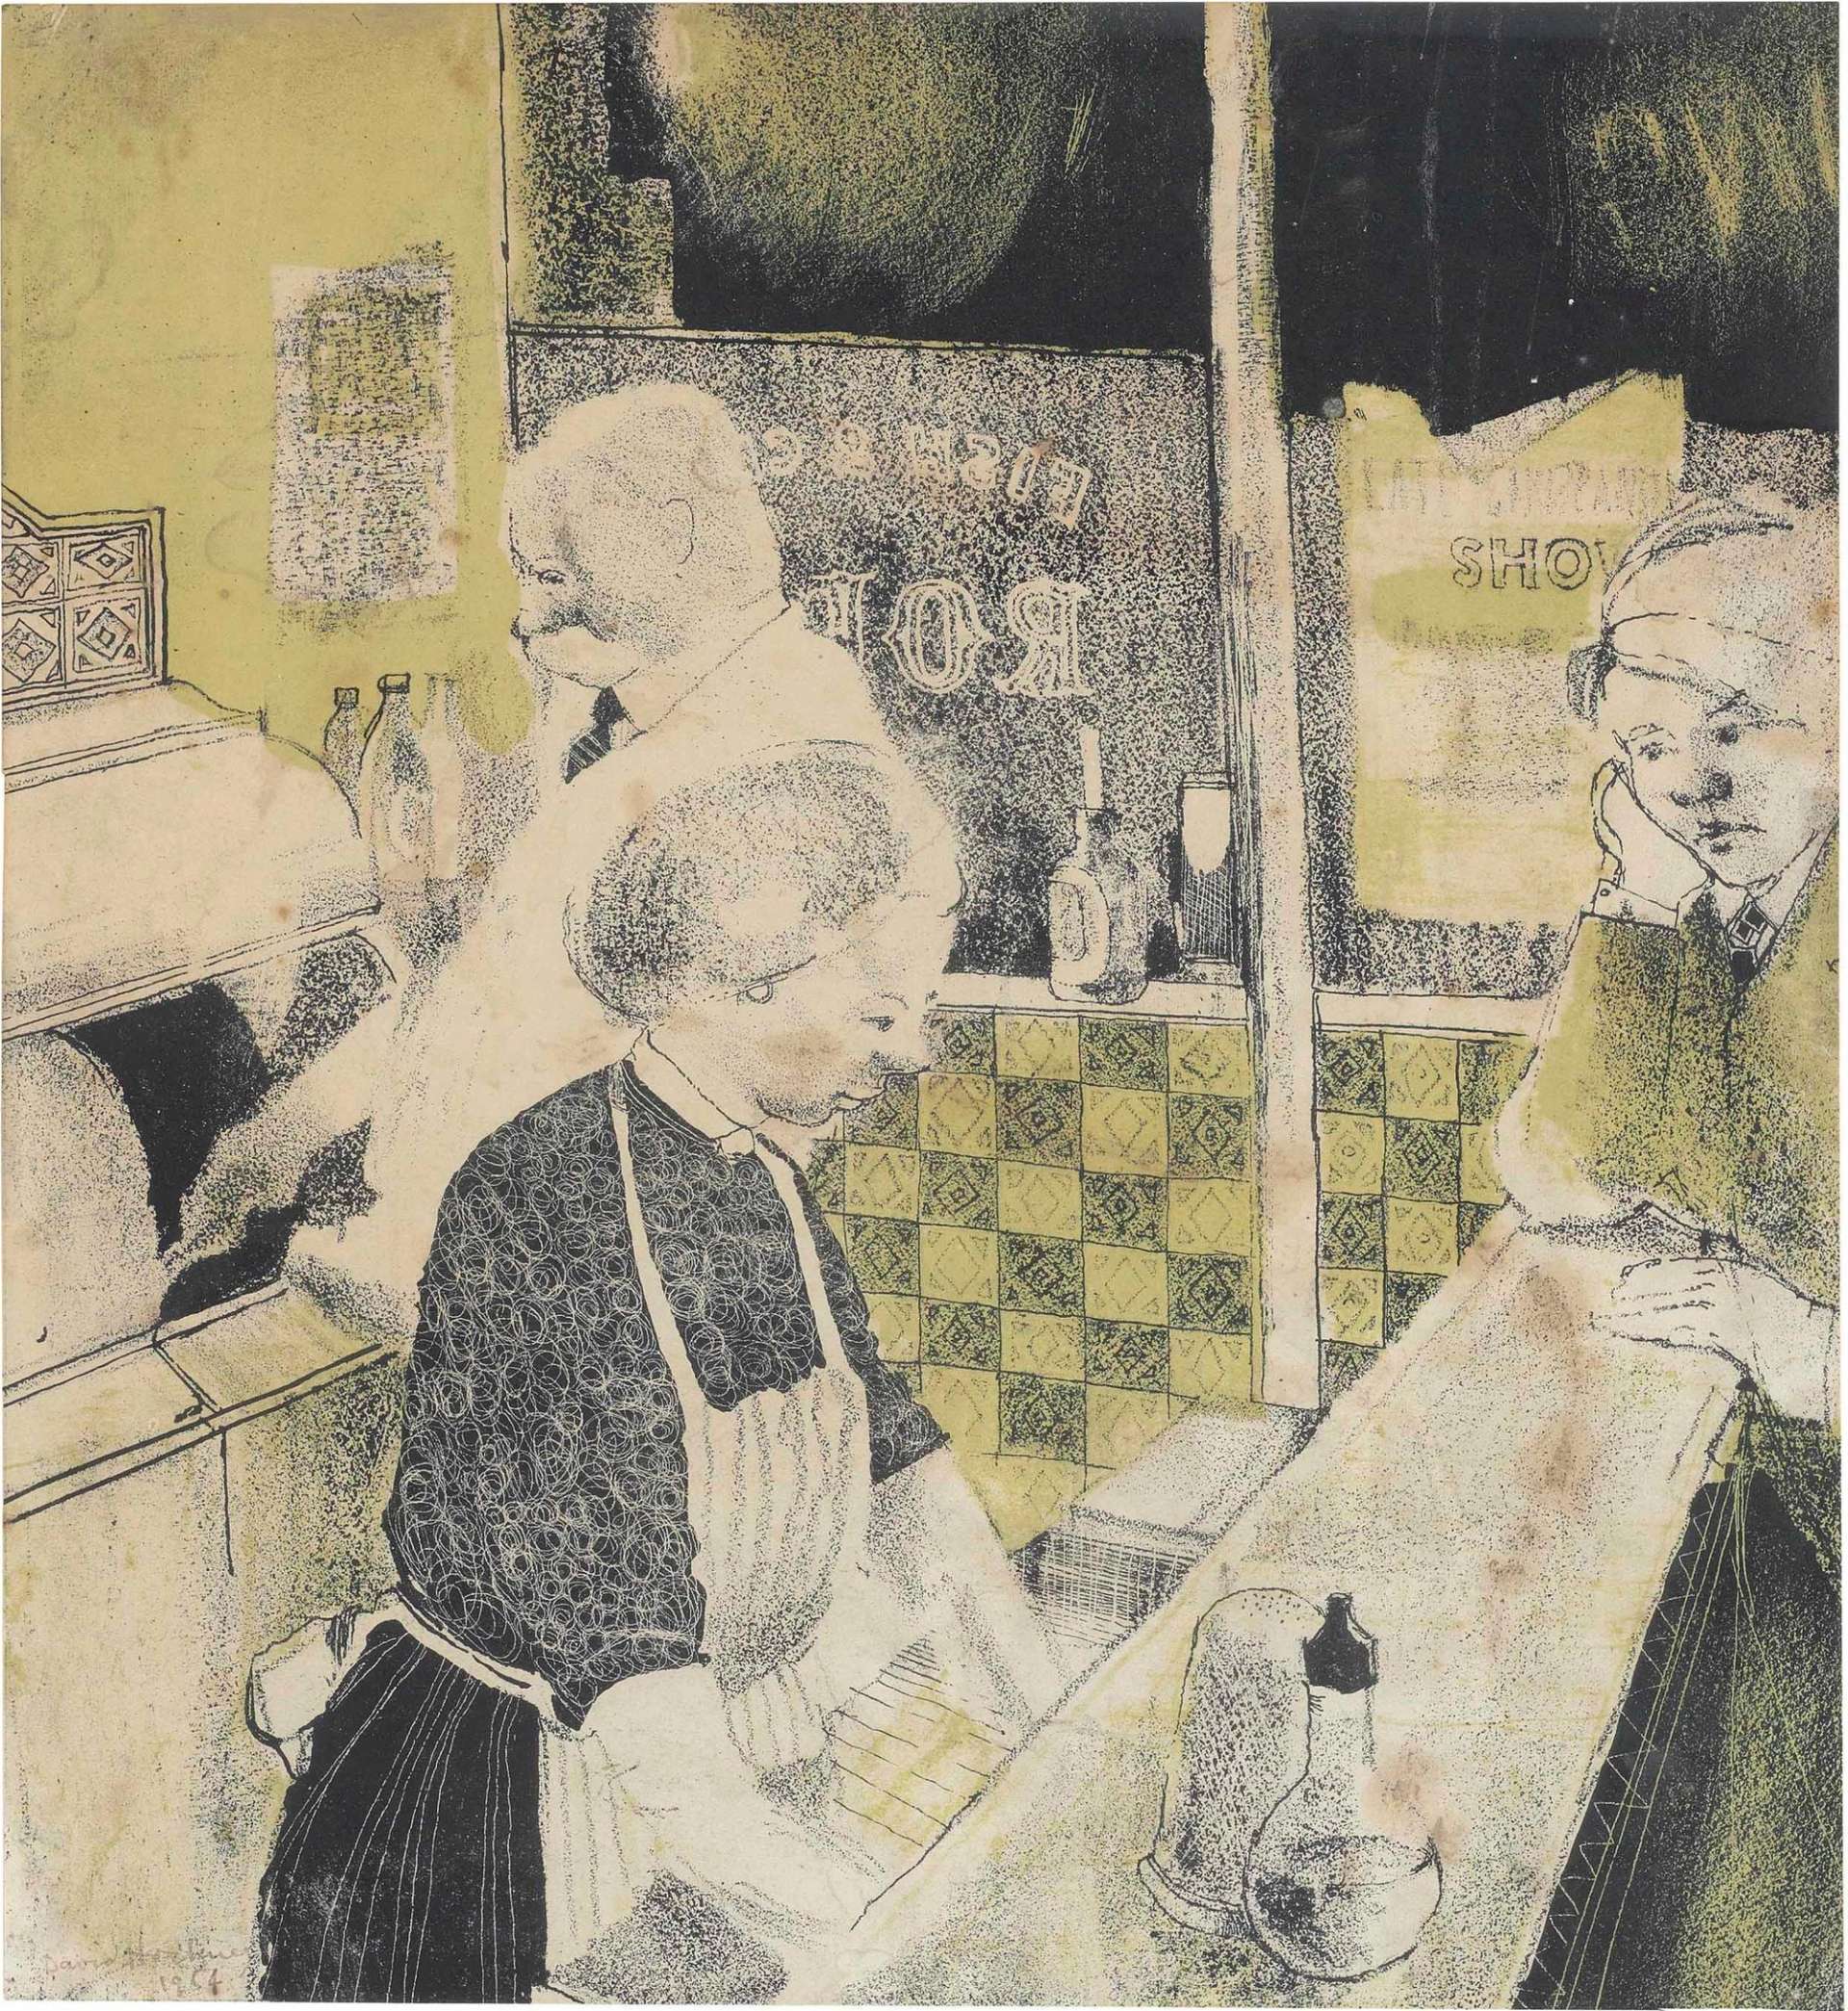 A lithograph print by David Hockney depicting the interior of a fish and chip shop with a yellow-green wash.